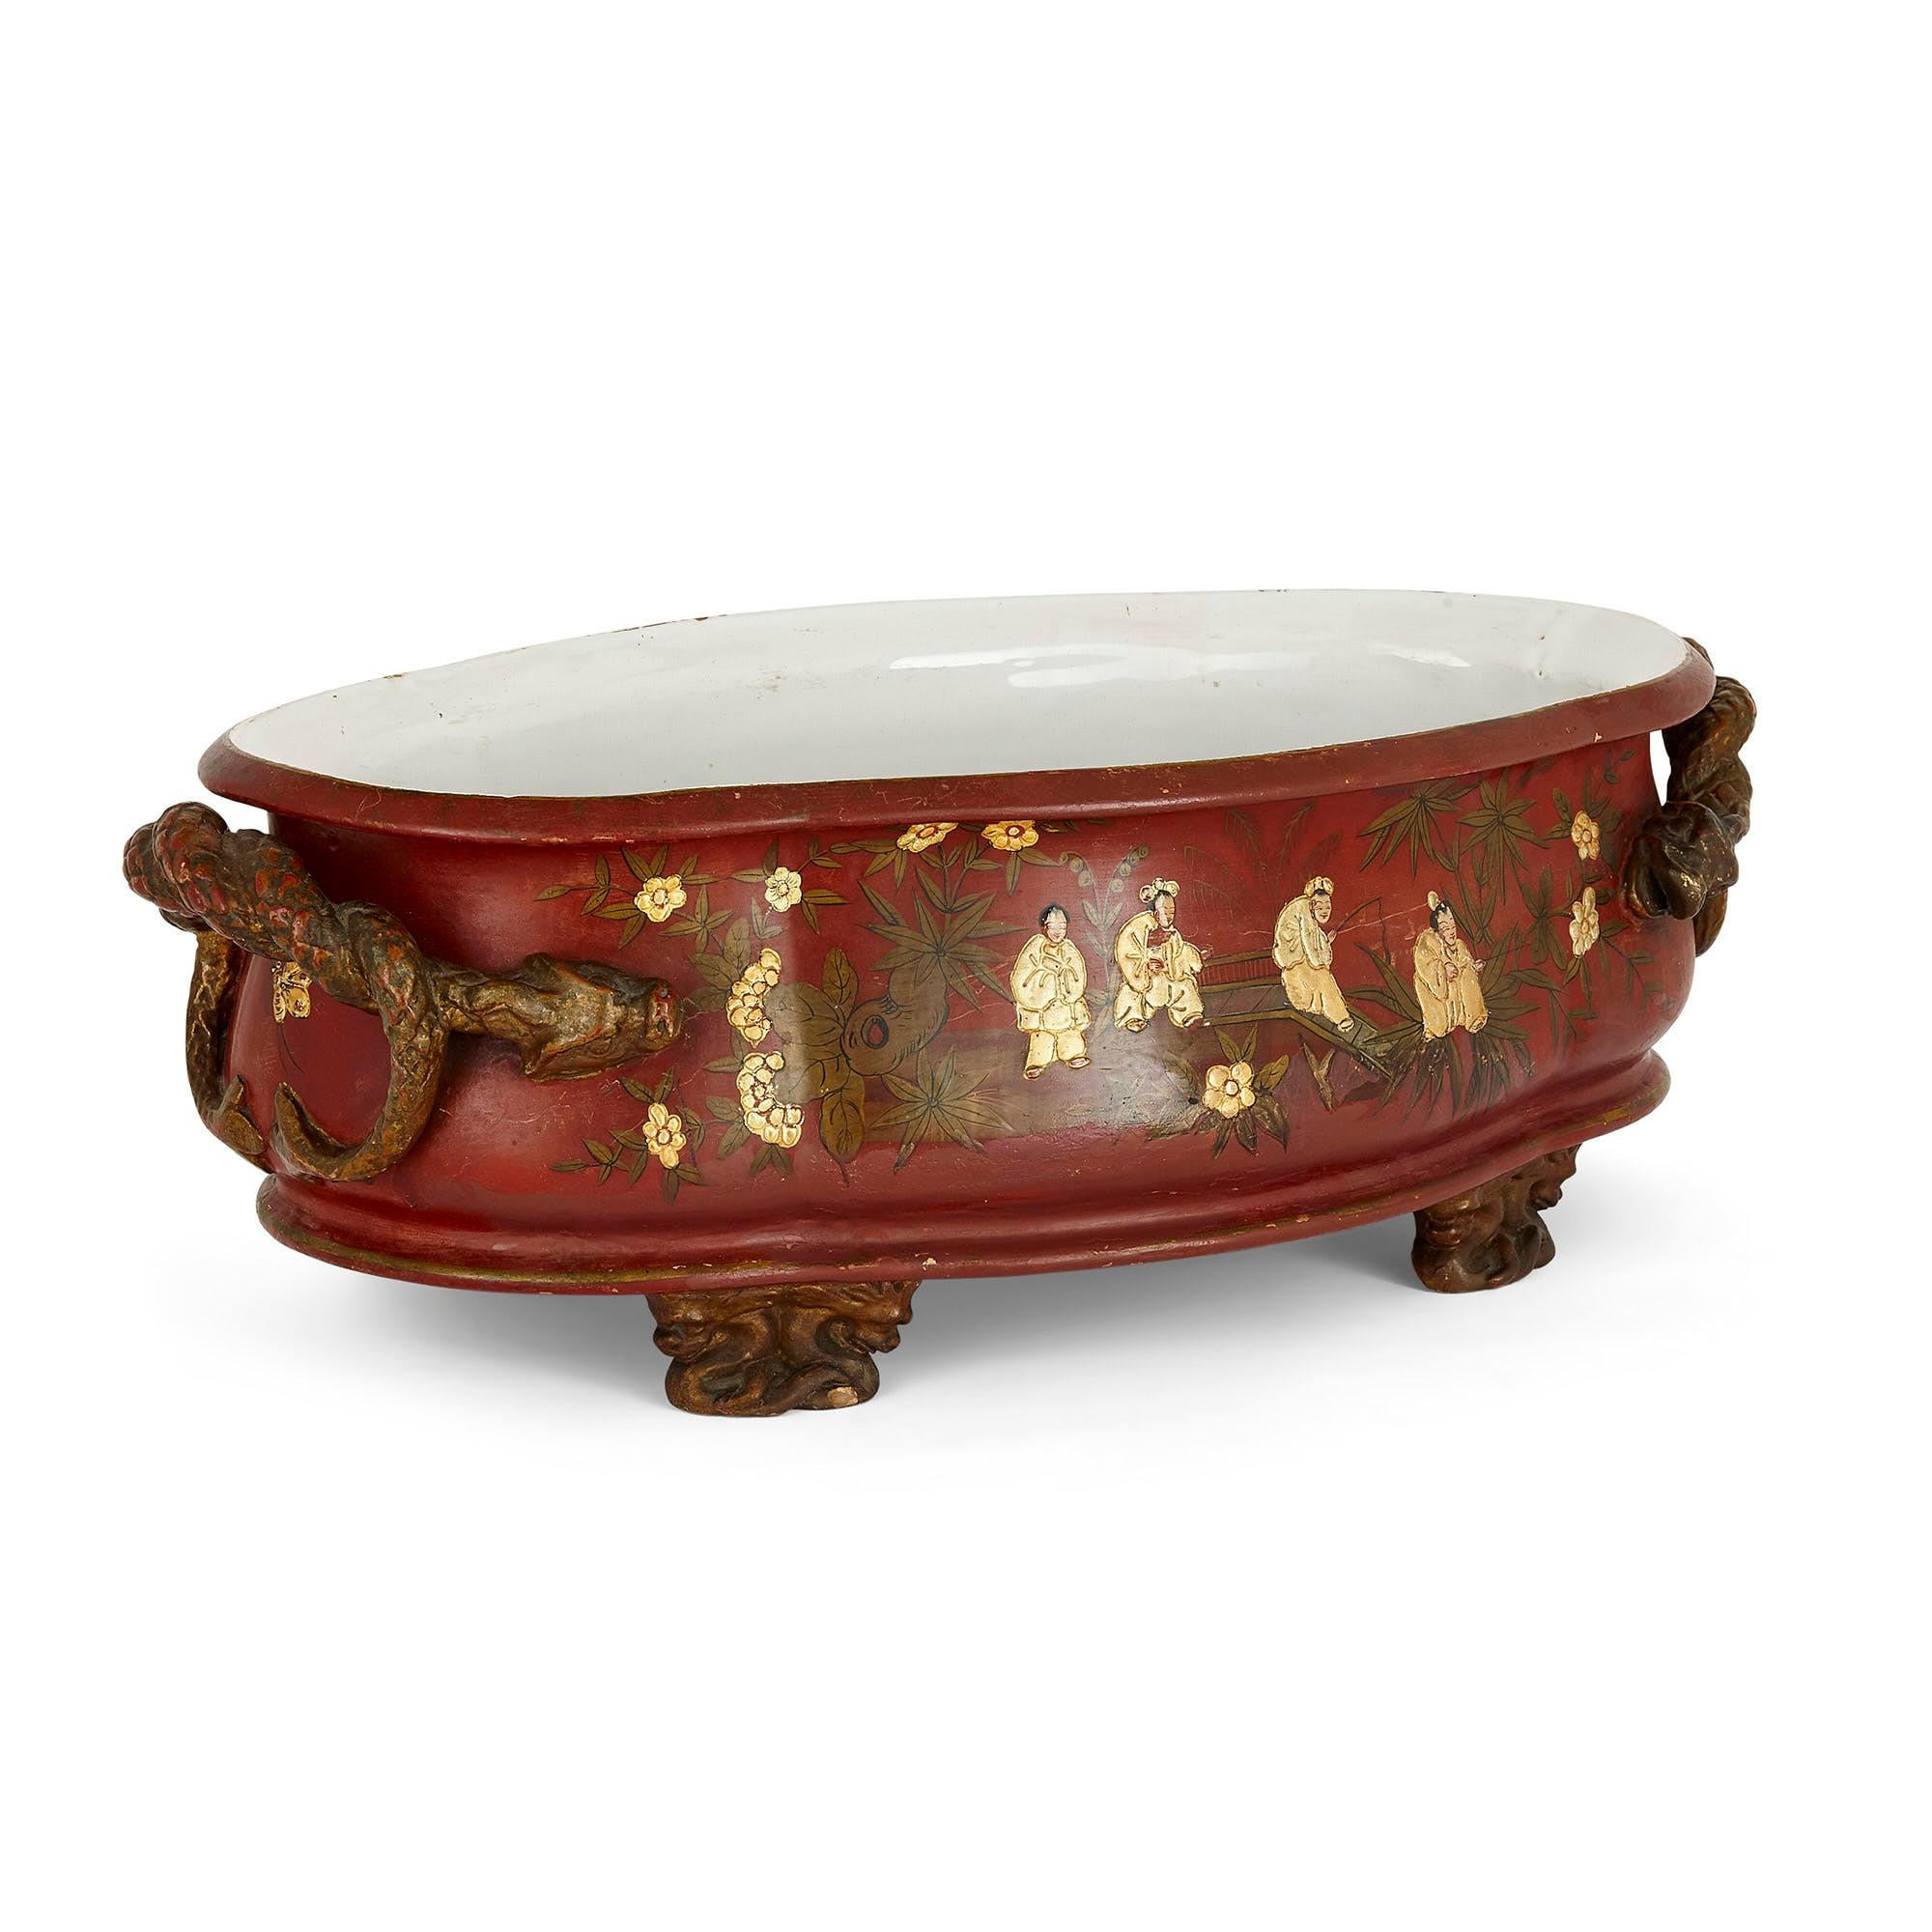 Gilt and painted Chinoiserie style terracotta jardinière
Continental, early 20th century
Measures: Height 19cm, width 55cm, depth 32cm

This charming terracotta jardinière was crafted in Europe in the Chinoiserie style. The ovoid jardinière